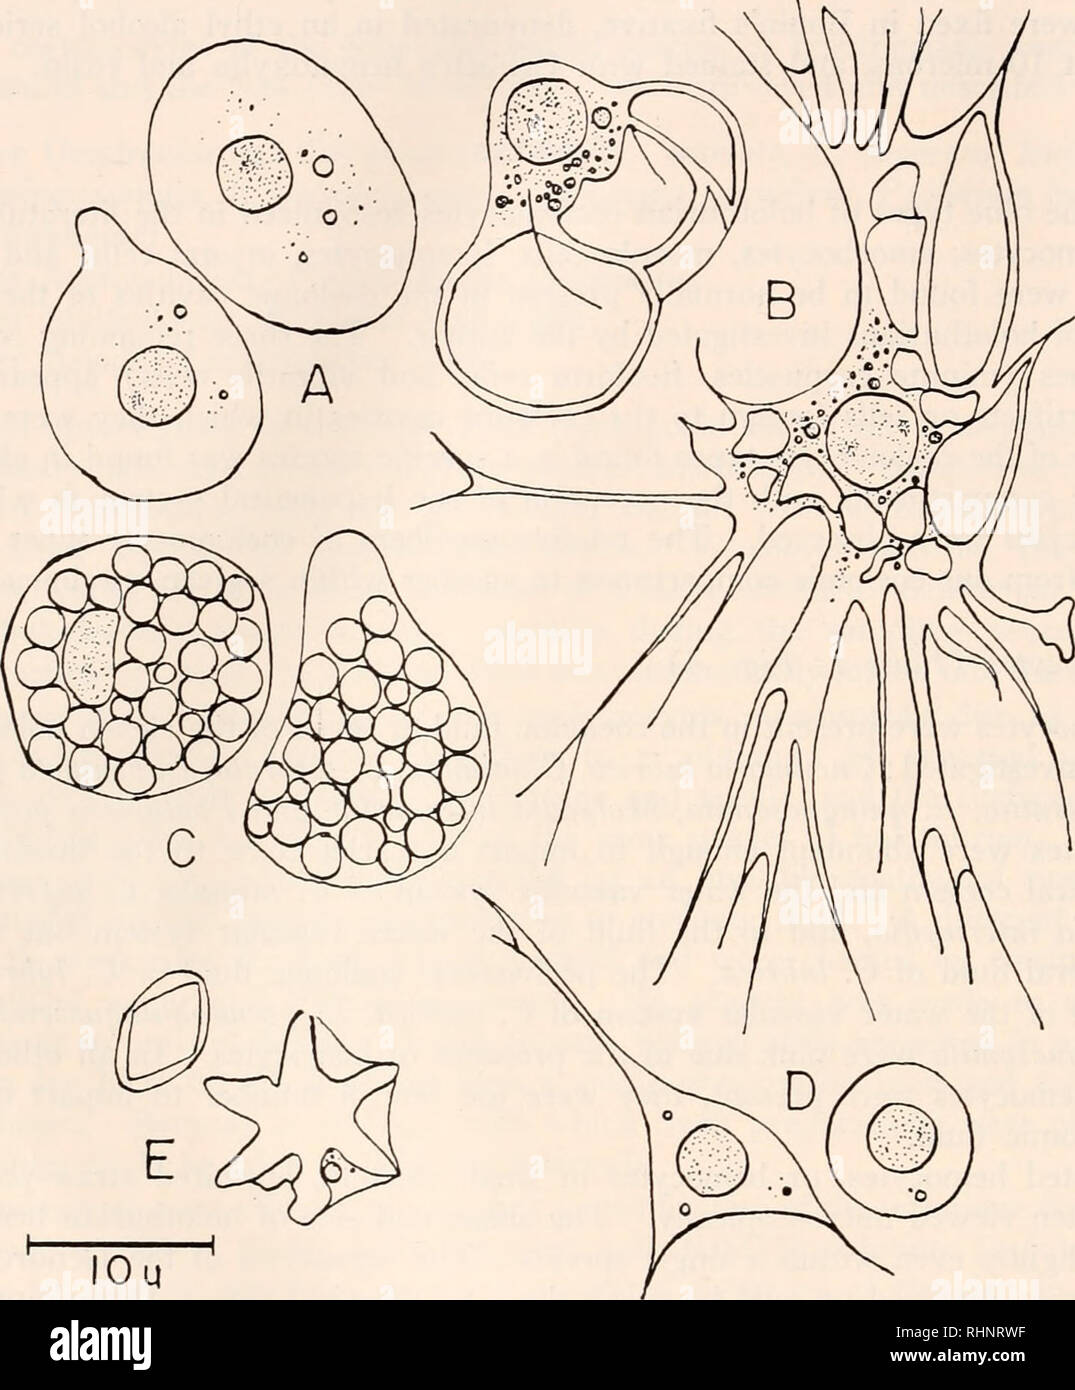 . The Biological bulletin. Biology; Zoology; Biology; Marine Biology. 292 HOWARD R. HETZEL. I0u PLATE I A. Two hemocytes of Cucumaria miniata. The lower left cell is in the process of pro- ducing a bleb of cytoplasm that would later be pinched off as a minute corpuscle. B. Two amoebocytes of Cucumaria miniata. The upper left cell is in the bladder or petaloid stage; the amoebocyte to the right is in the filiform stage. C. Two morula cells (trephocytes) of Cucumaria miniata. The cell on the left shows the nucleus. D. Two lymphocytes of Cucumaria miniata. E. Two crystal cells: a rhomboidal cryst Stock Photo